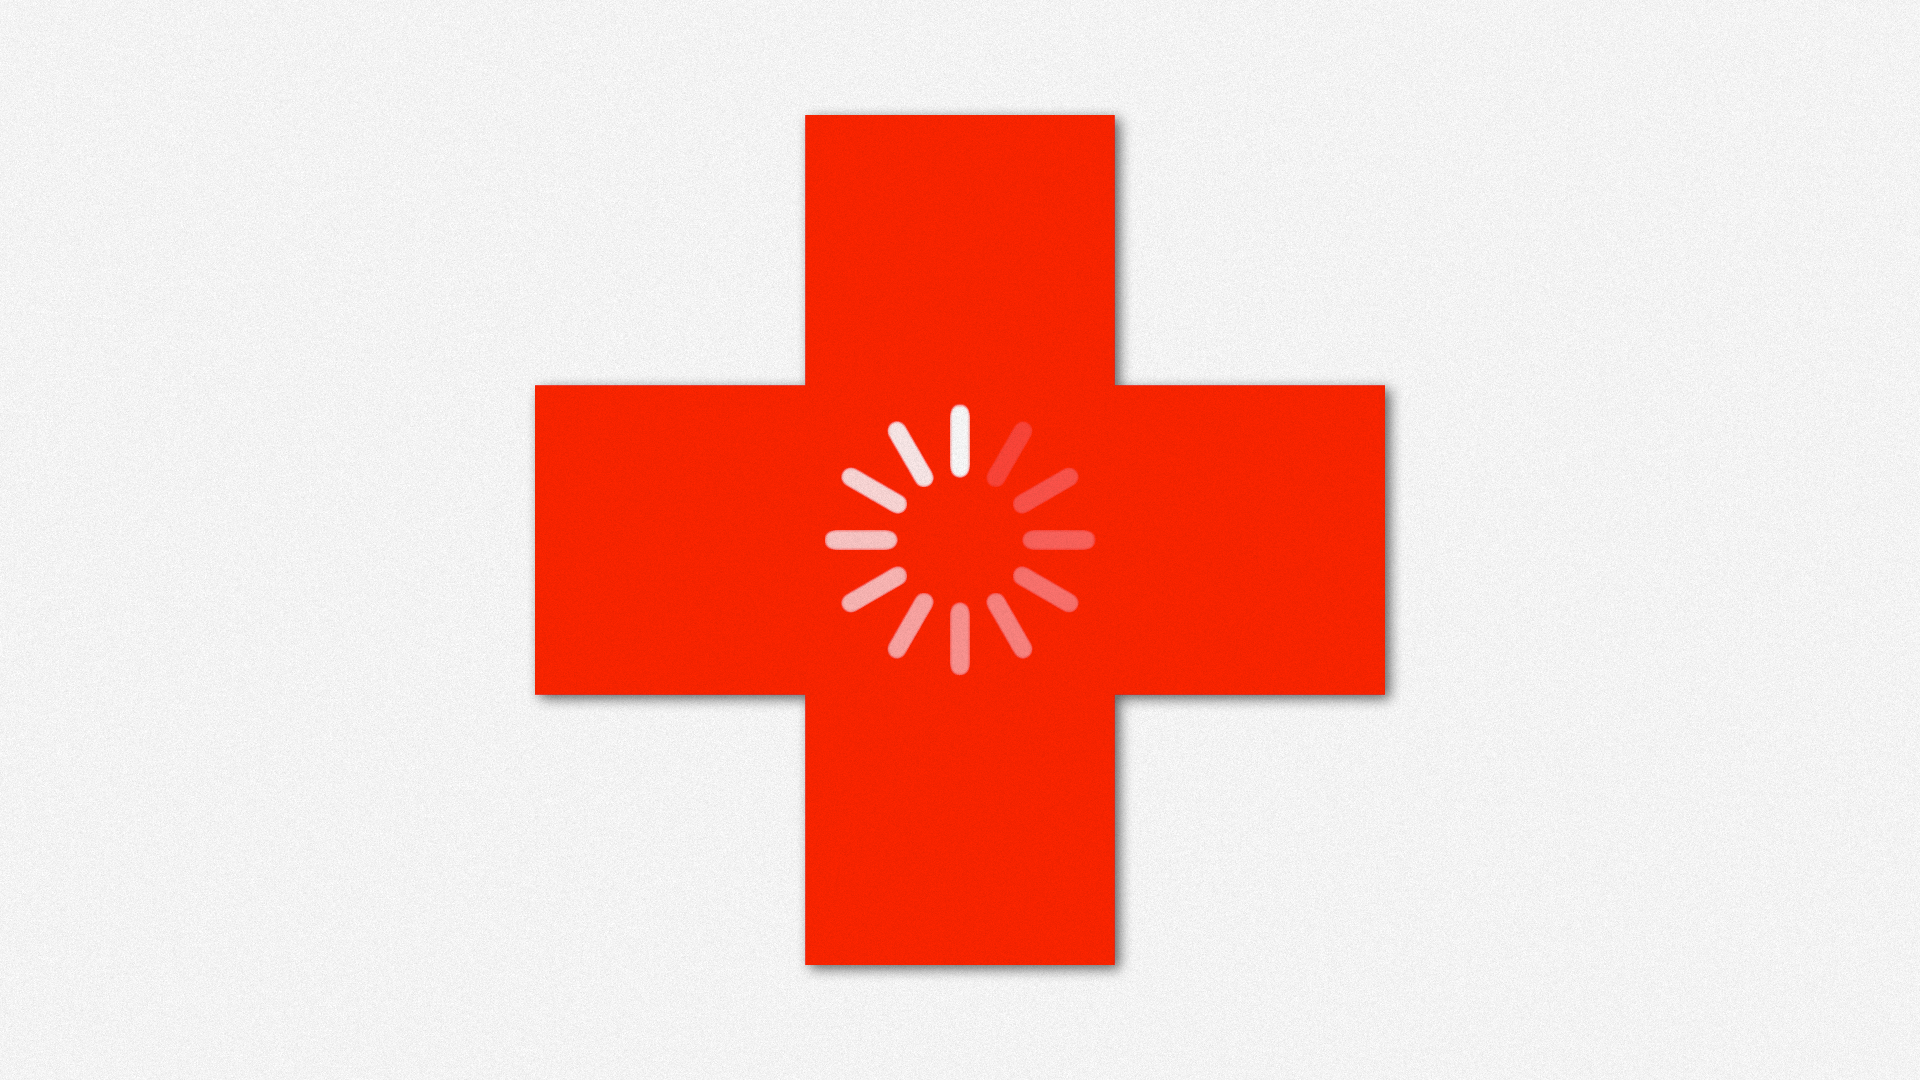 Animated illustration of a loading icon over a medical cross.